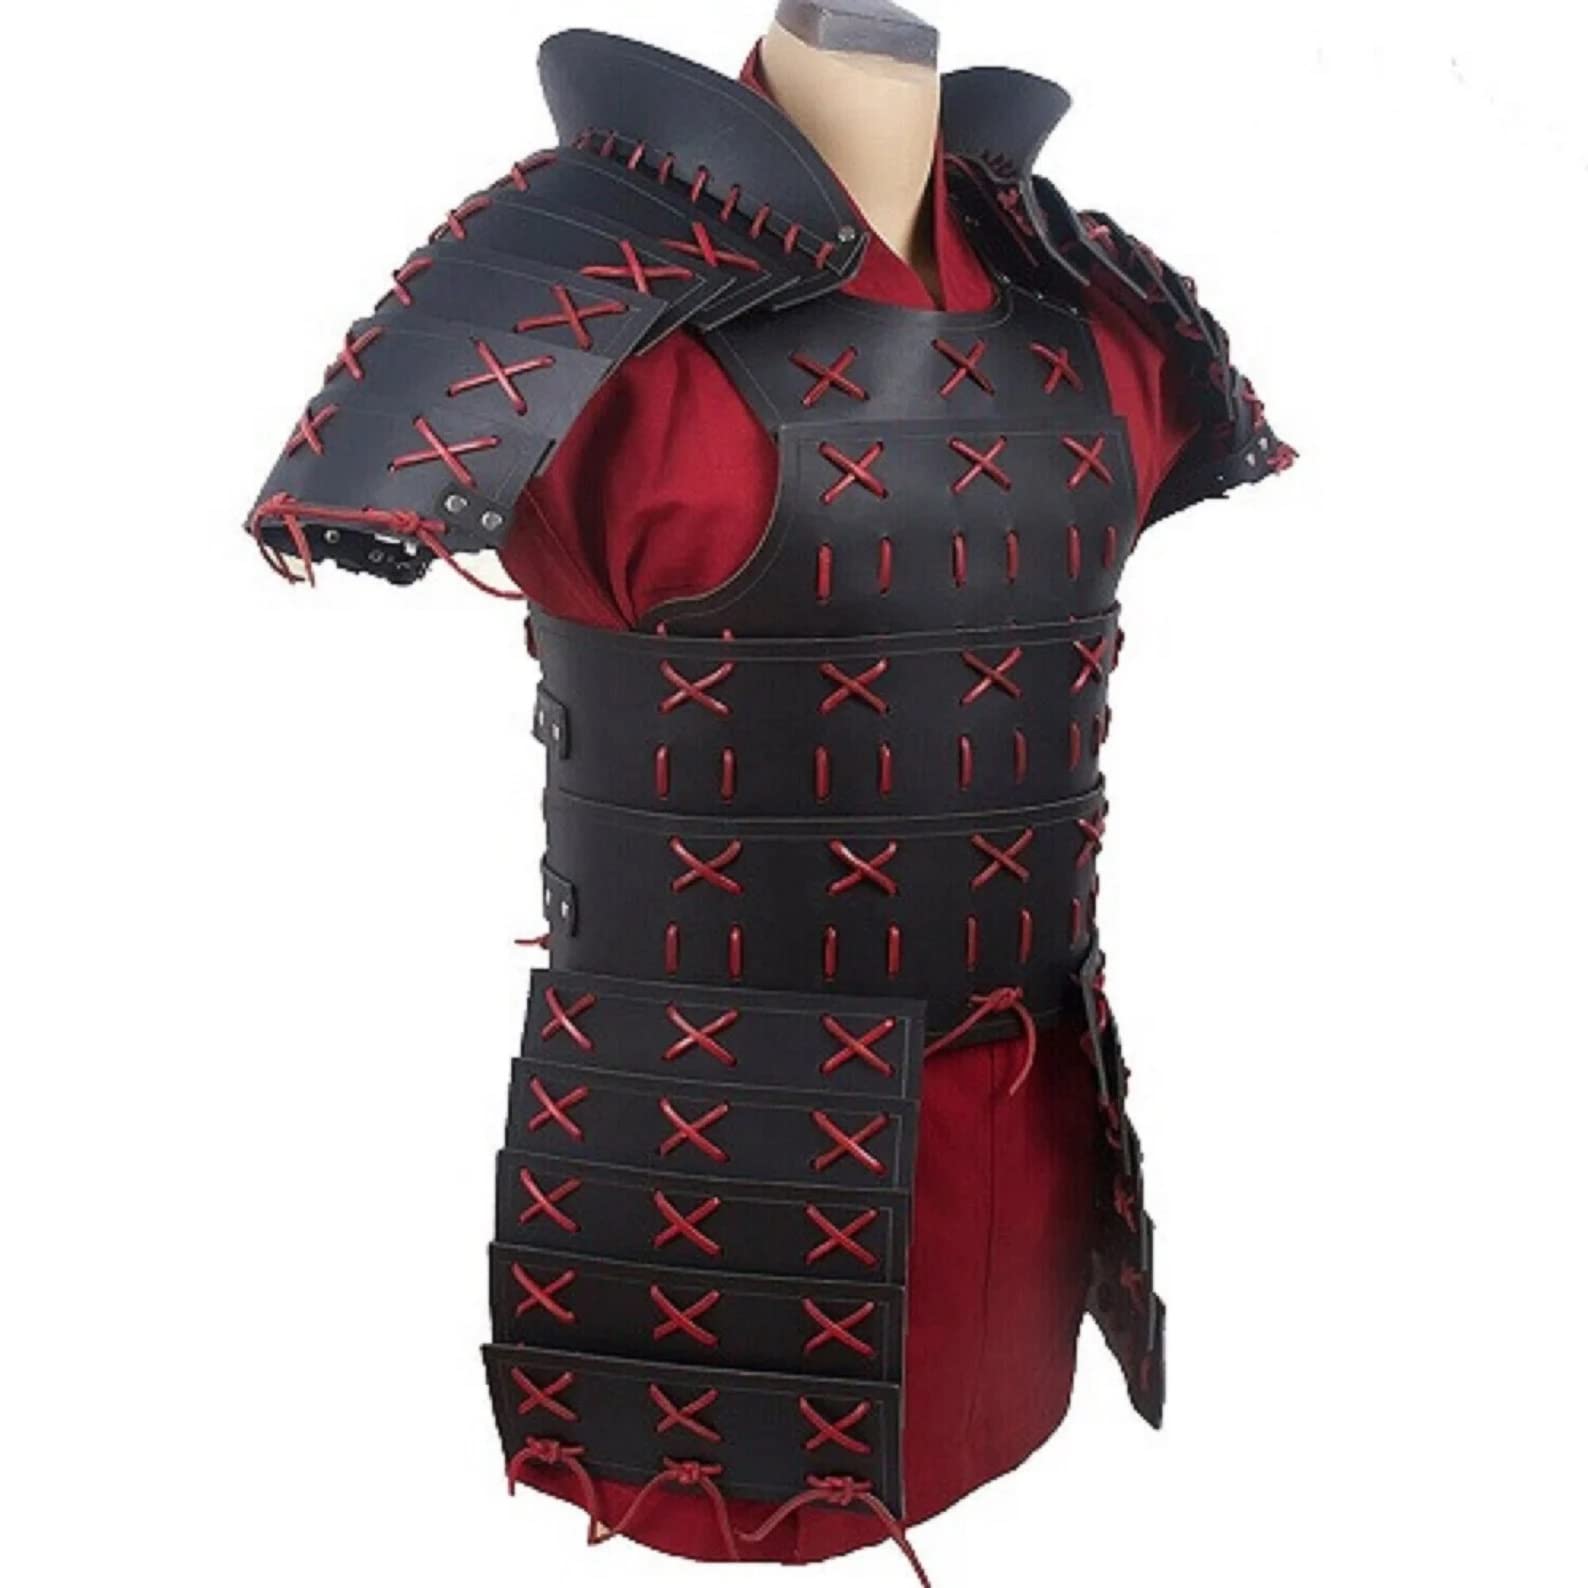 Medieval leather Samurai Armor - Leather Armor for LARP and Cosplay